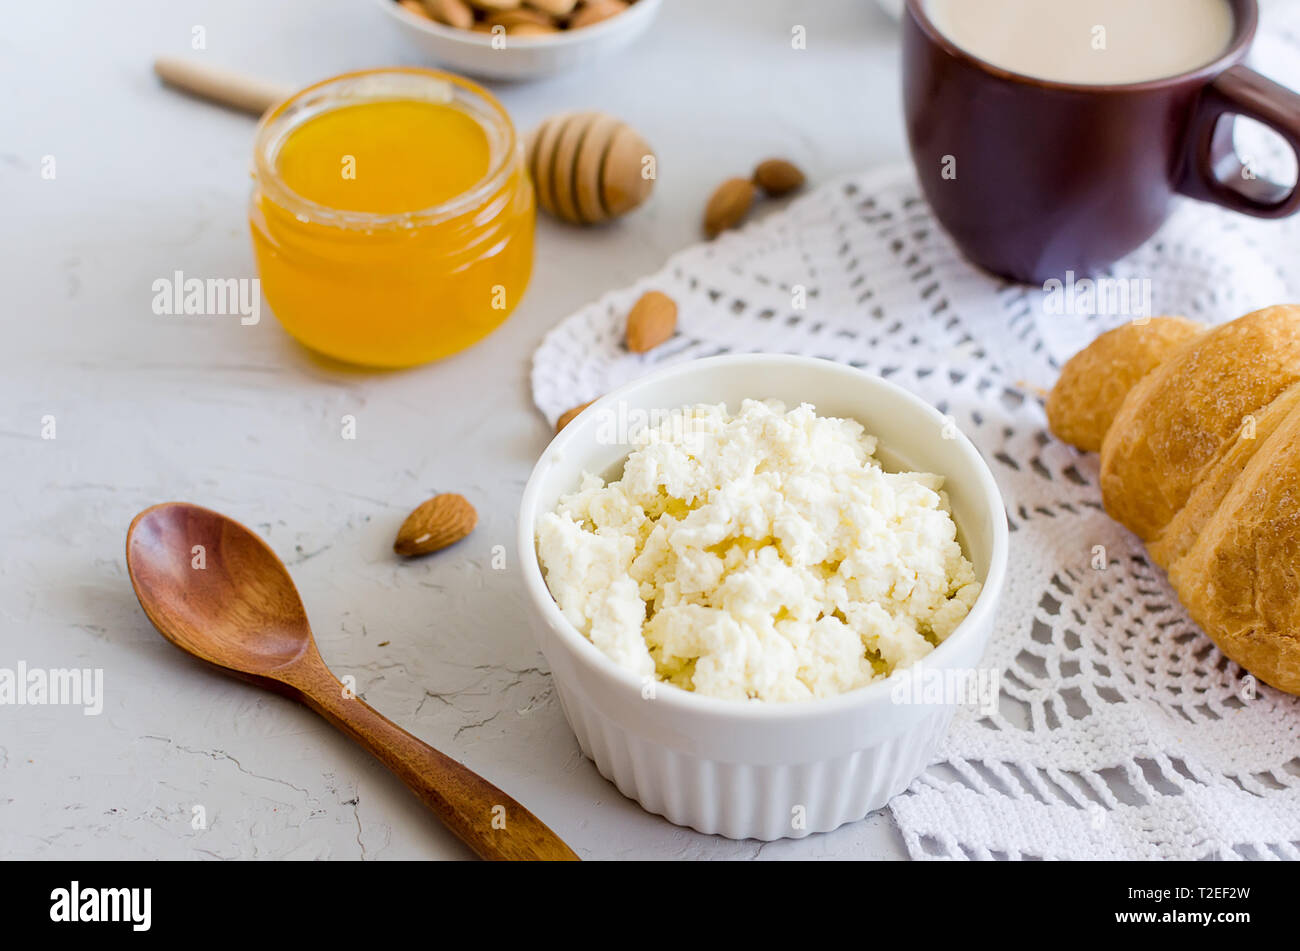 Healthy Breakfast With Cottage Cheese Or Ricotta With Almond Nuts